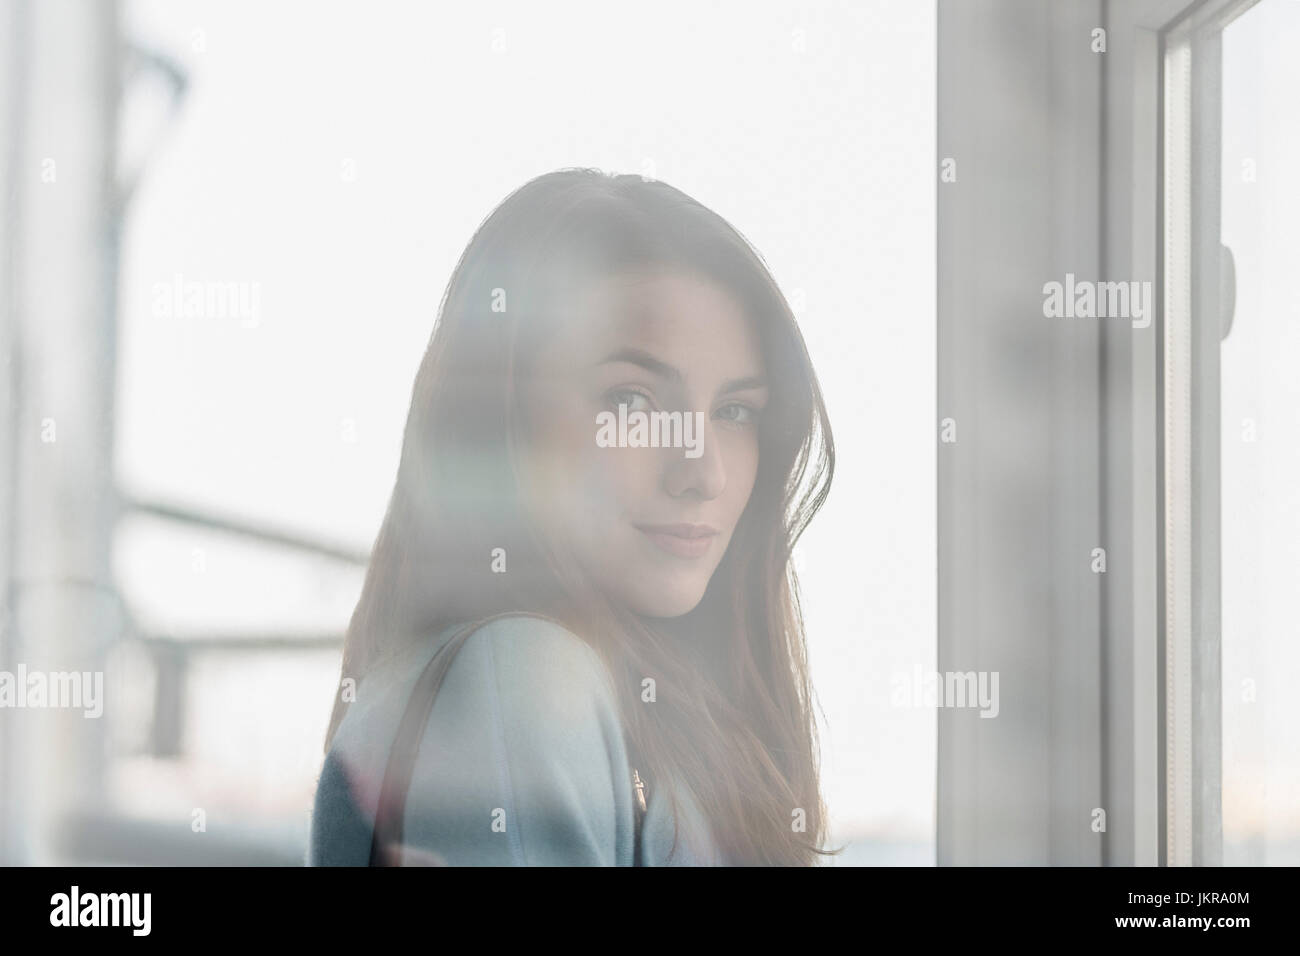 Portrait of young beautiful woman with long hair seen through glass window Stock Photo